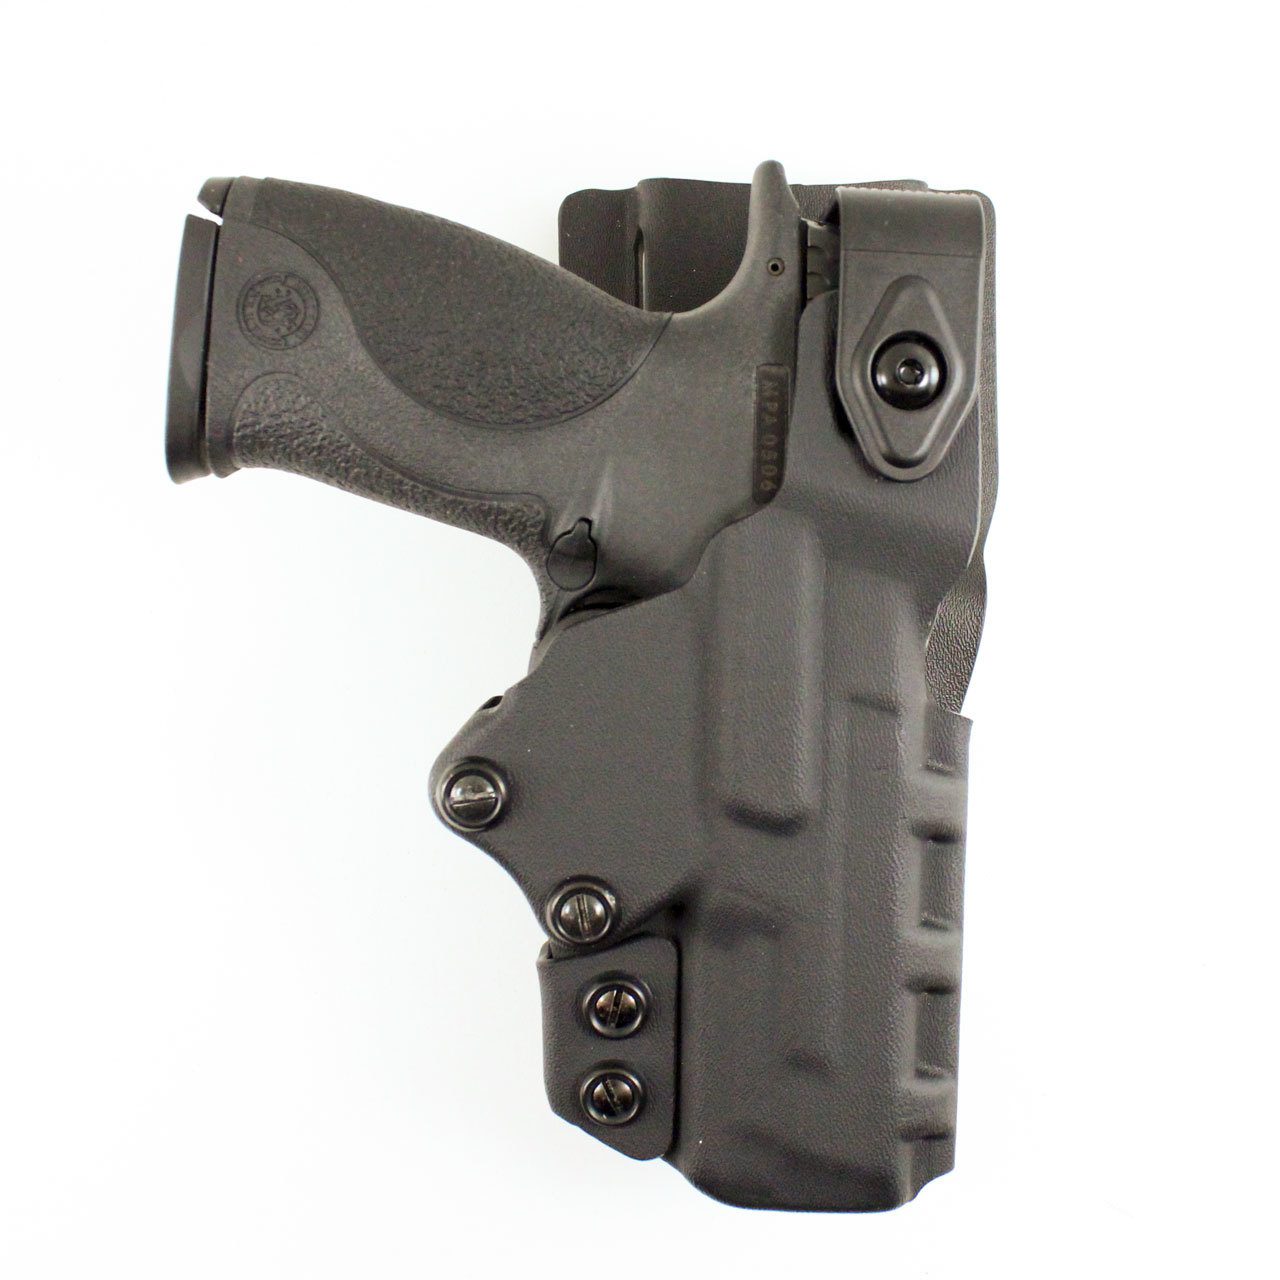 Desantis Just Cause 2.0 Holster - Tactical & Duty Gear